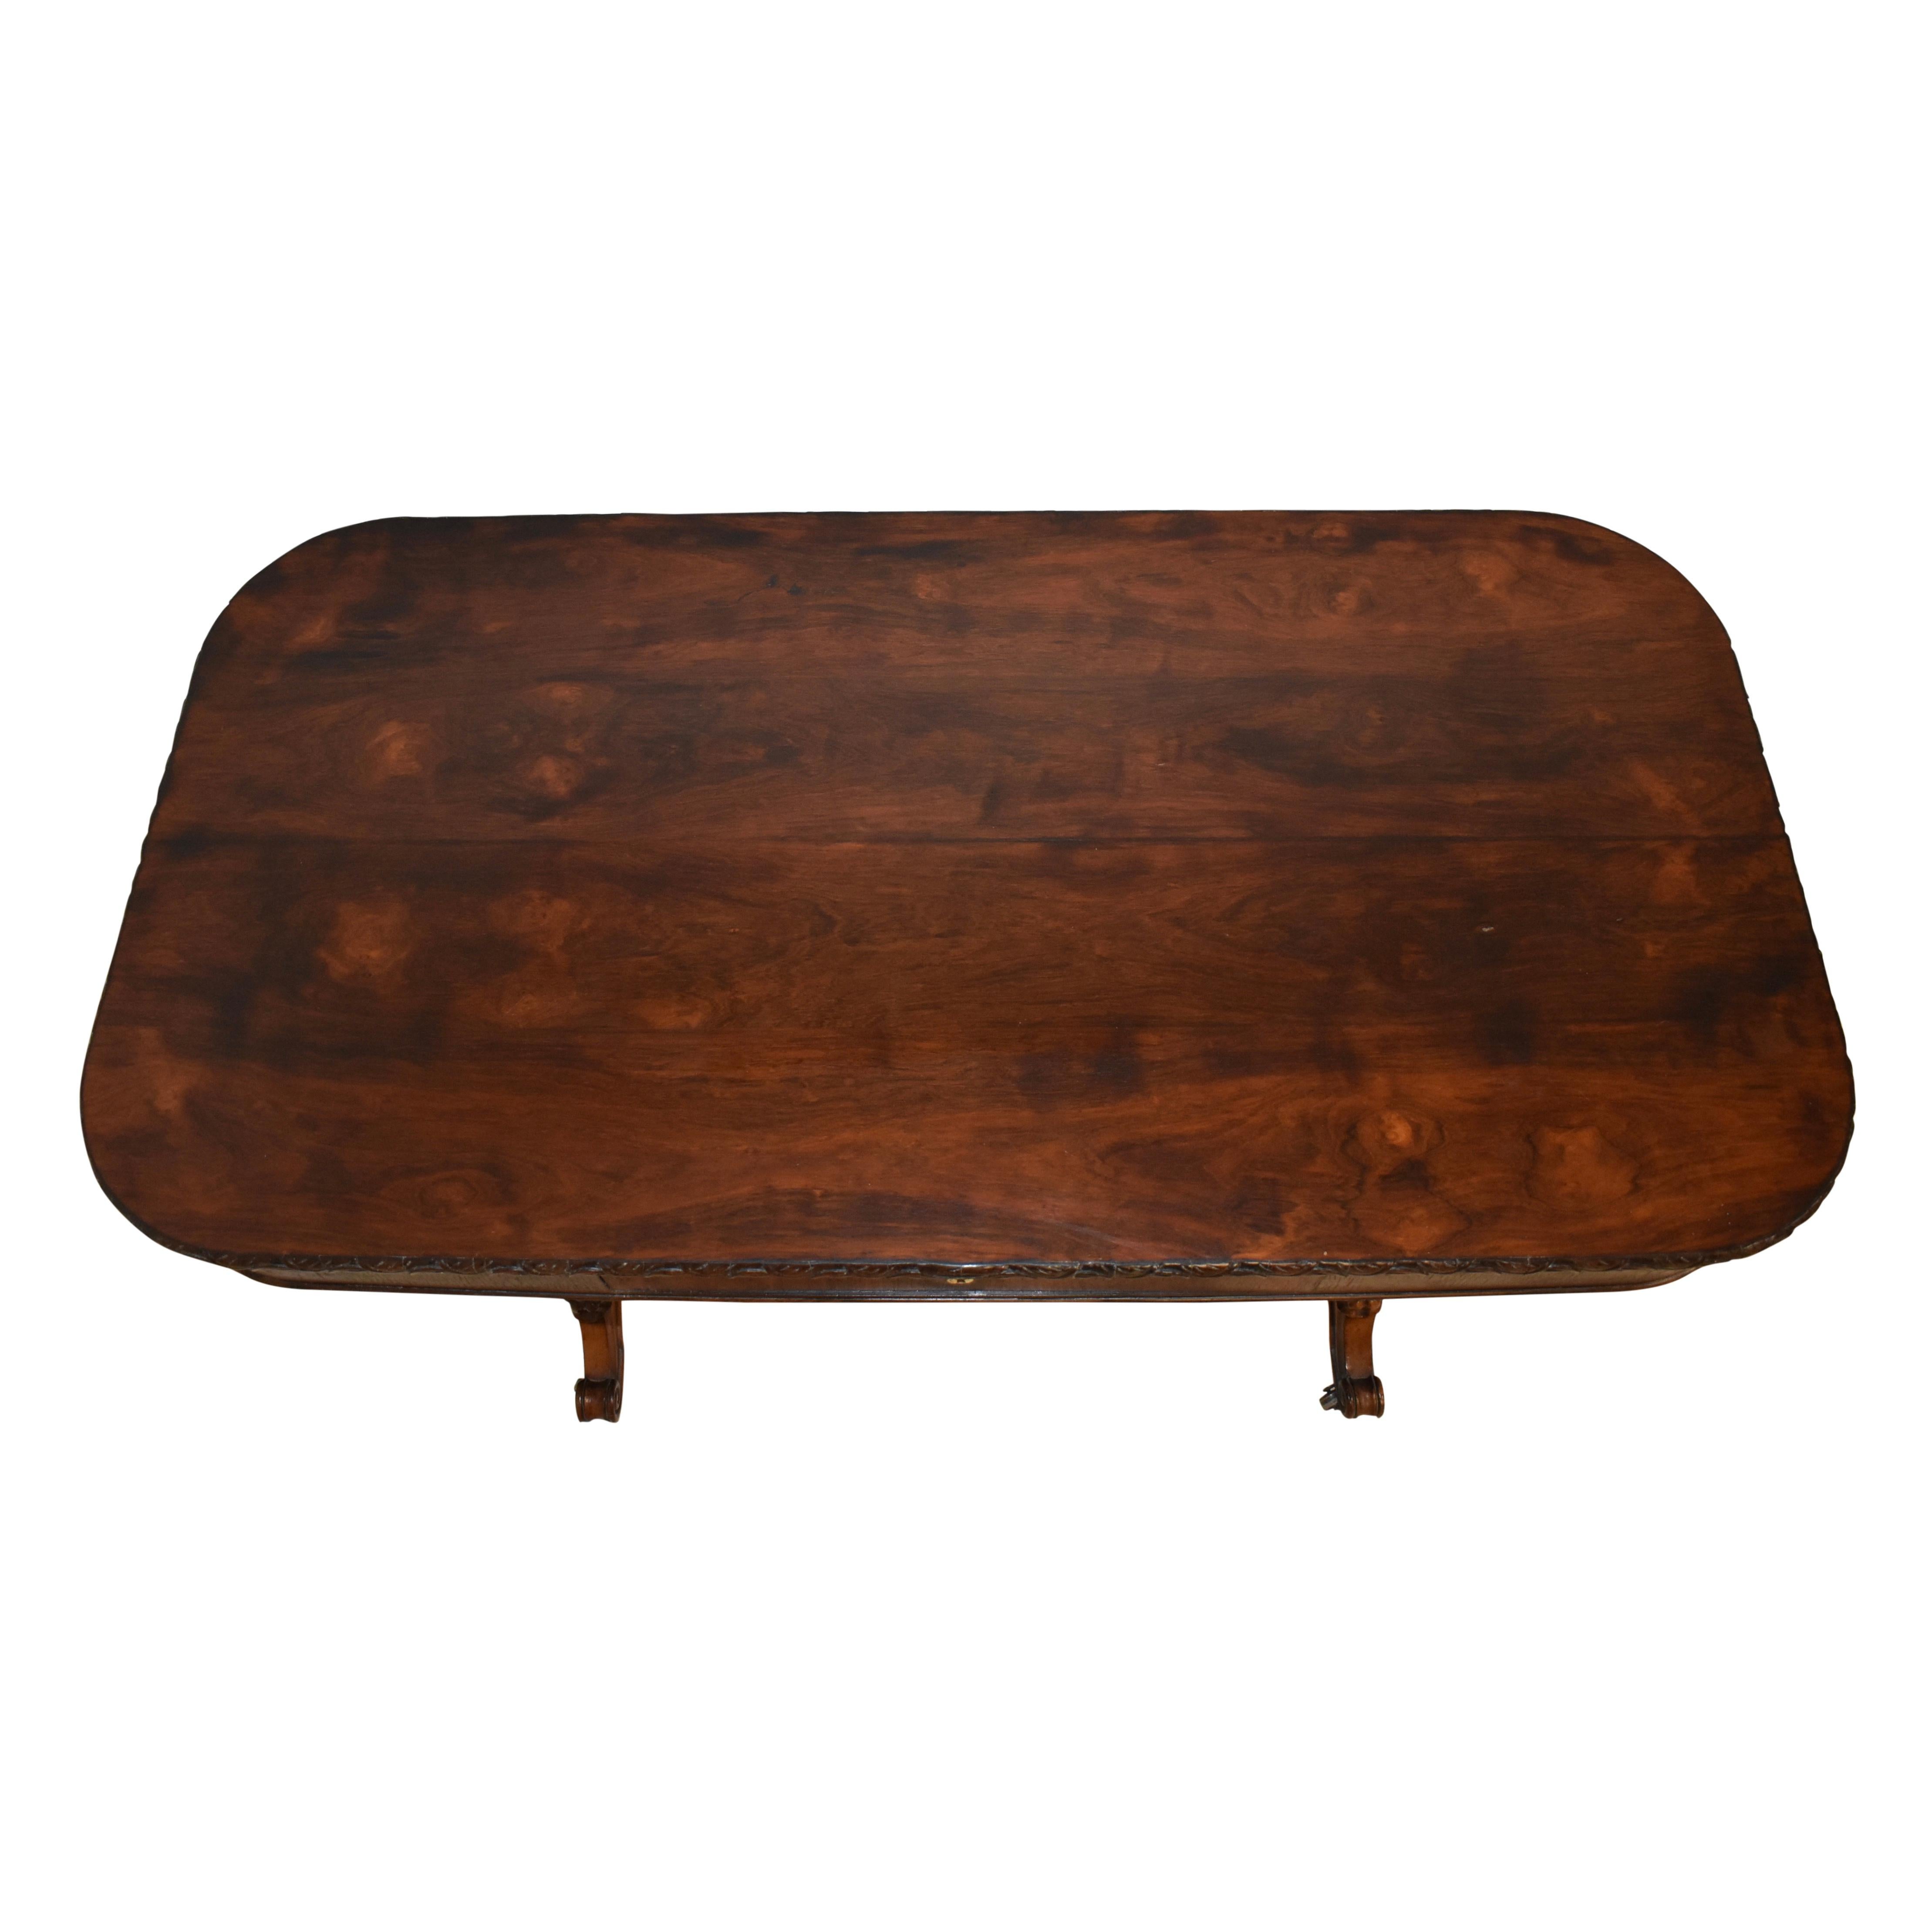 Featuring a beautiful burled, veneer top over oak with rounded corners and a carved edge, this table is raised on two mahogany turned legs, which terminate in scrolled feet with carved flowers at their centers. A turned stretcher unites the legs,